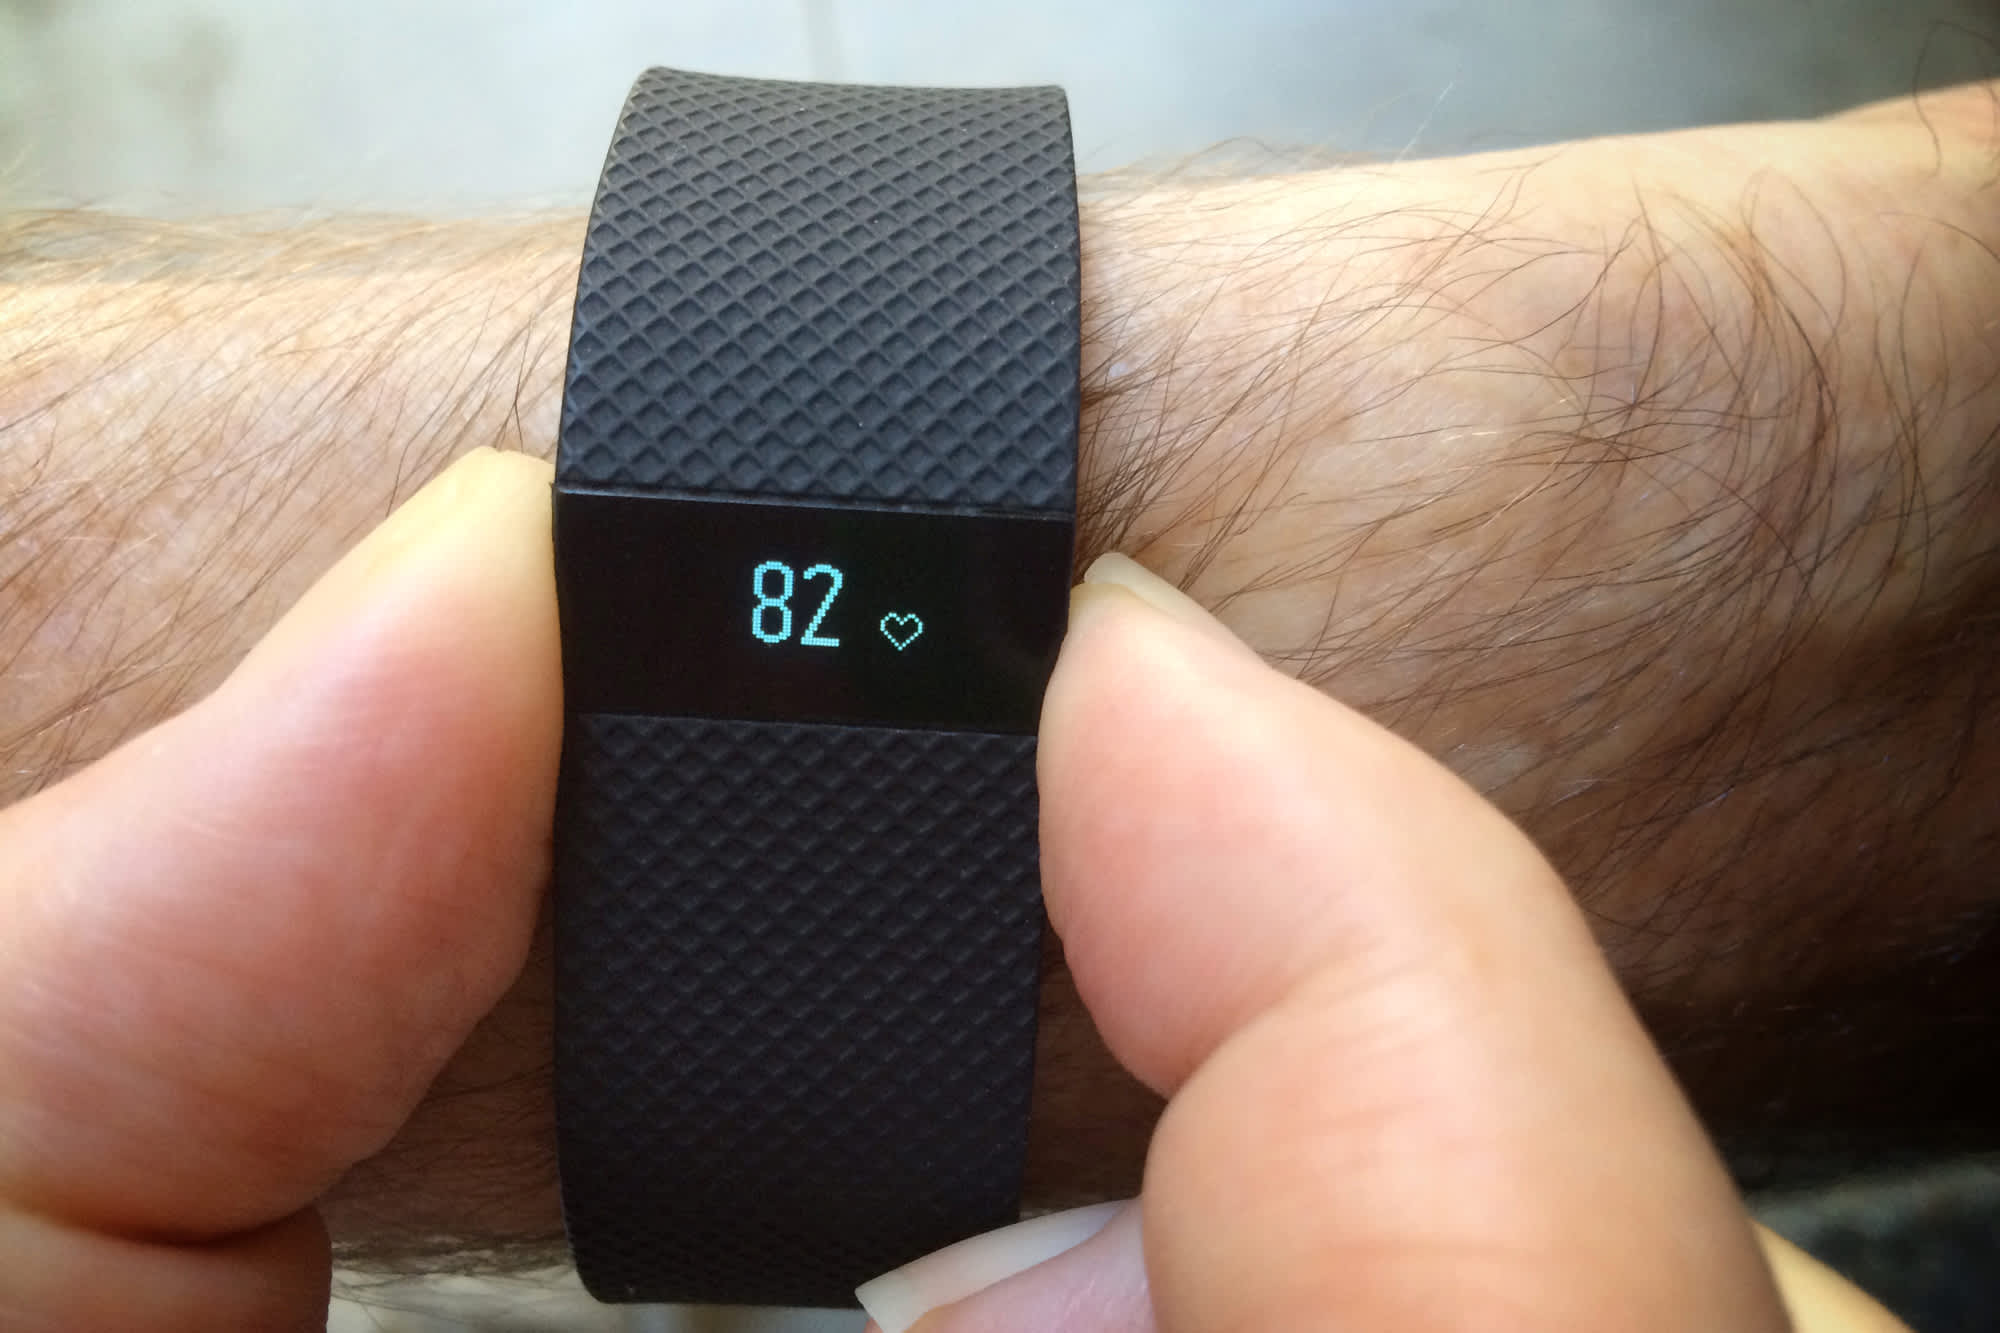 sav radikal frø Study shows Fitbit trackers 'highly inaccurate'